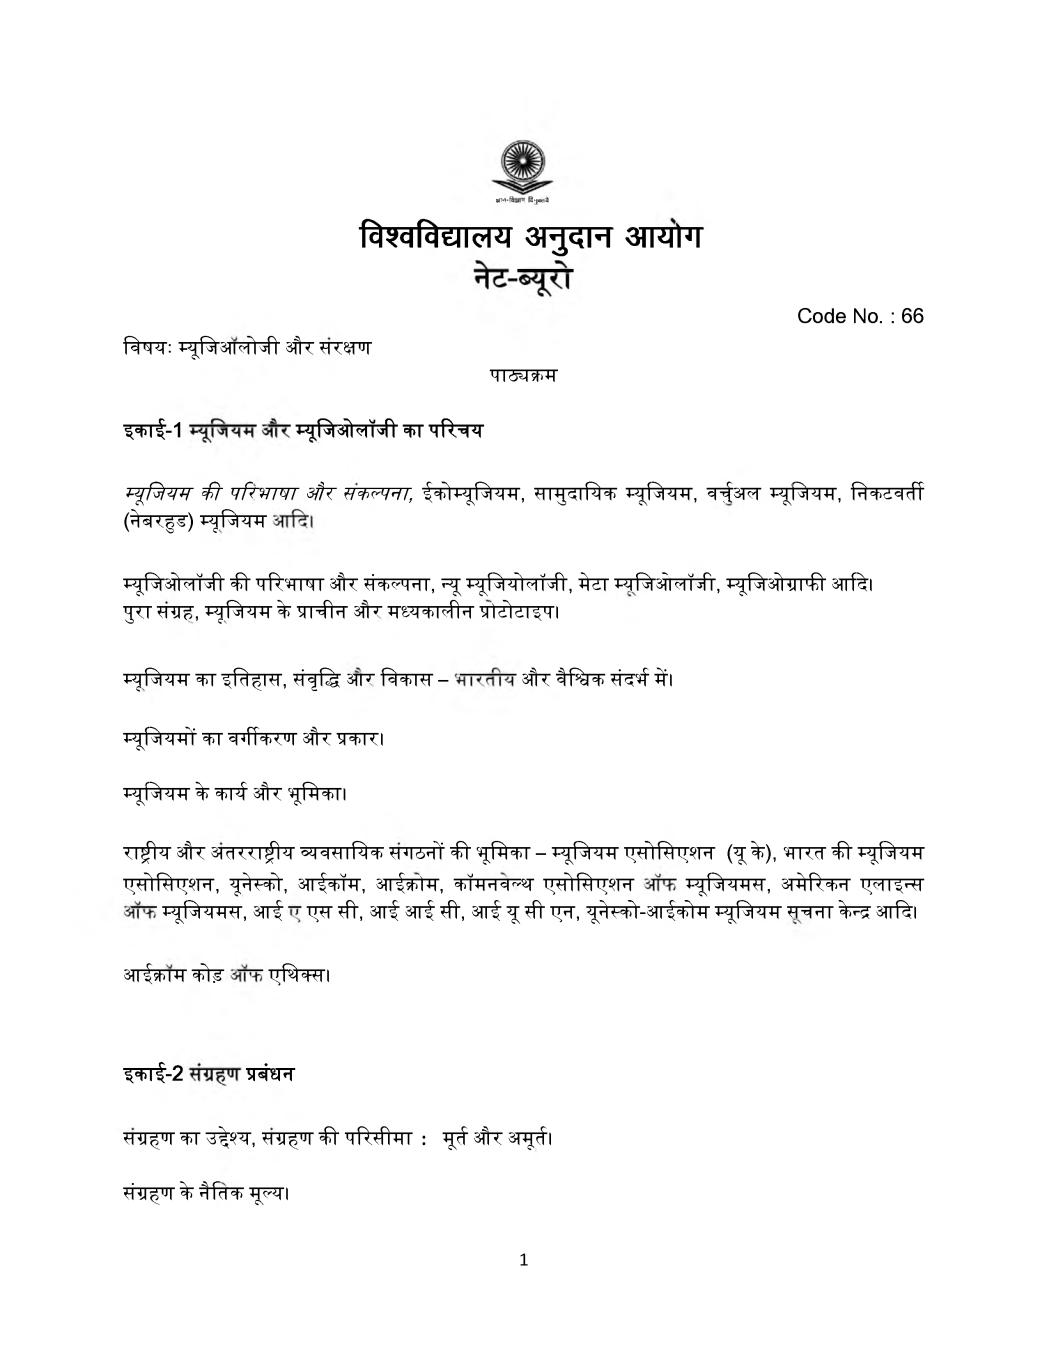 UGC NET Syllabus for Museology and Conservation 2020 in Hindi - Page 1